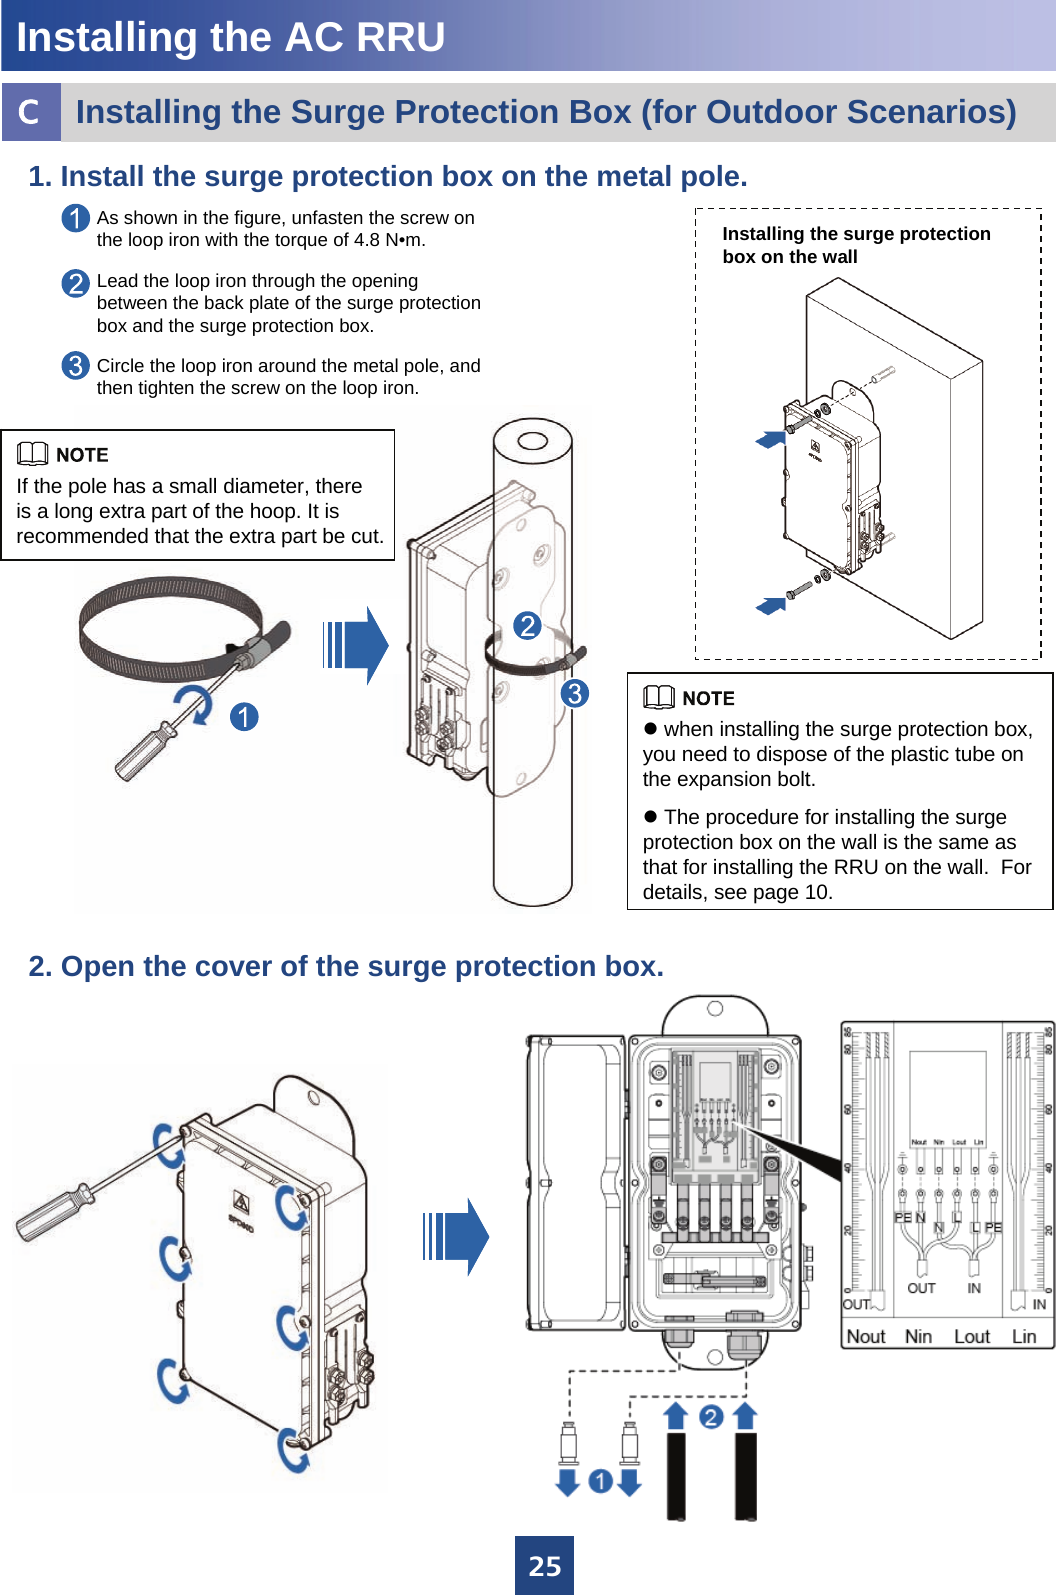 252. Open the cover of the surge protection box. 1. Install the surge protection box on the metal pole. As shown in the figure, unfasten the screw on the loop iron with the torque of 4.8 N•m.Lead the loop iron through the opening between the back plate of the surge protection box and the surge protection box.Circle the loop iron around the metal pole, and then tighten the screw on the loop iron. Installing the surge protectionbox on the wallInstalling the AC RRUInstalling the Surge Protection Box (for Outdoor Scenarios)cIf the pole has a small diameter, there is a long extra part of the hoop. It is recommended that the extra part be cut. zwhen installing the surge protection box, you need to dispose of the plastic tube on the expansion bolt.zThe procedure for installing the surge protection box on the wall is the same as that for installing the RRU on the wall.  For details, see page 10.